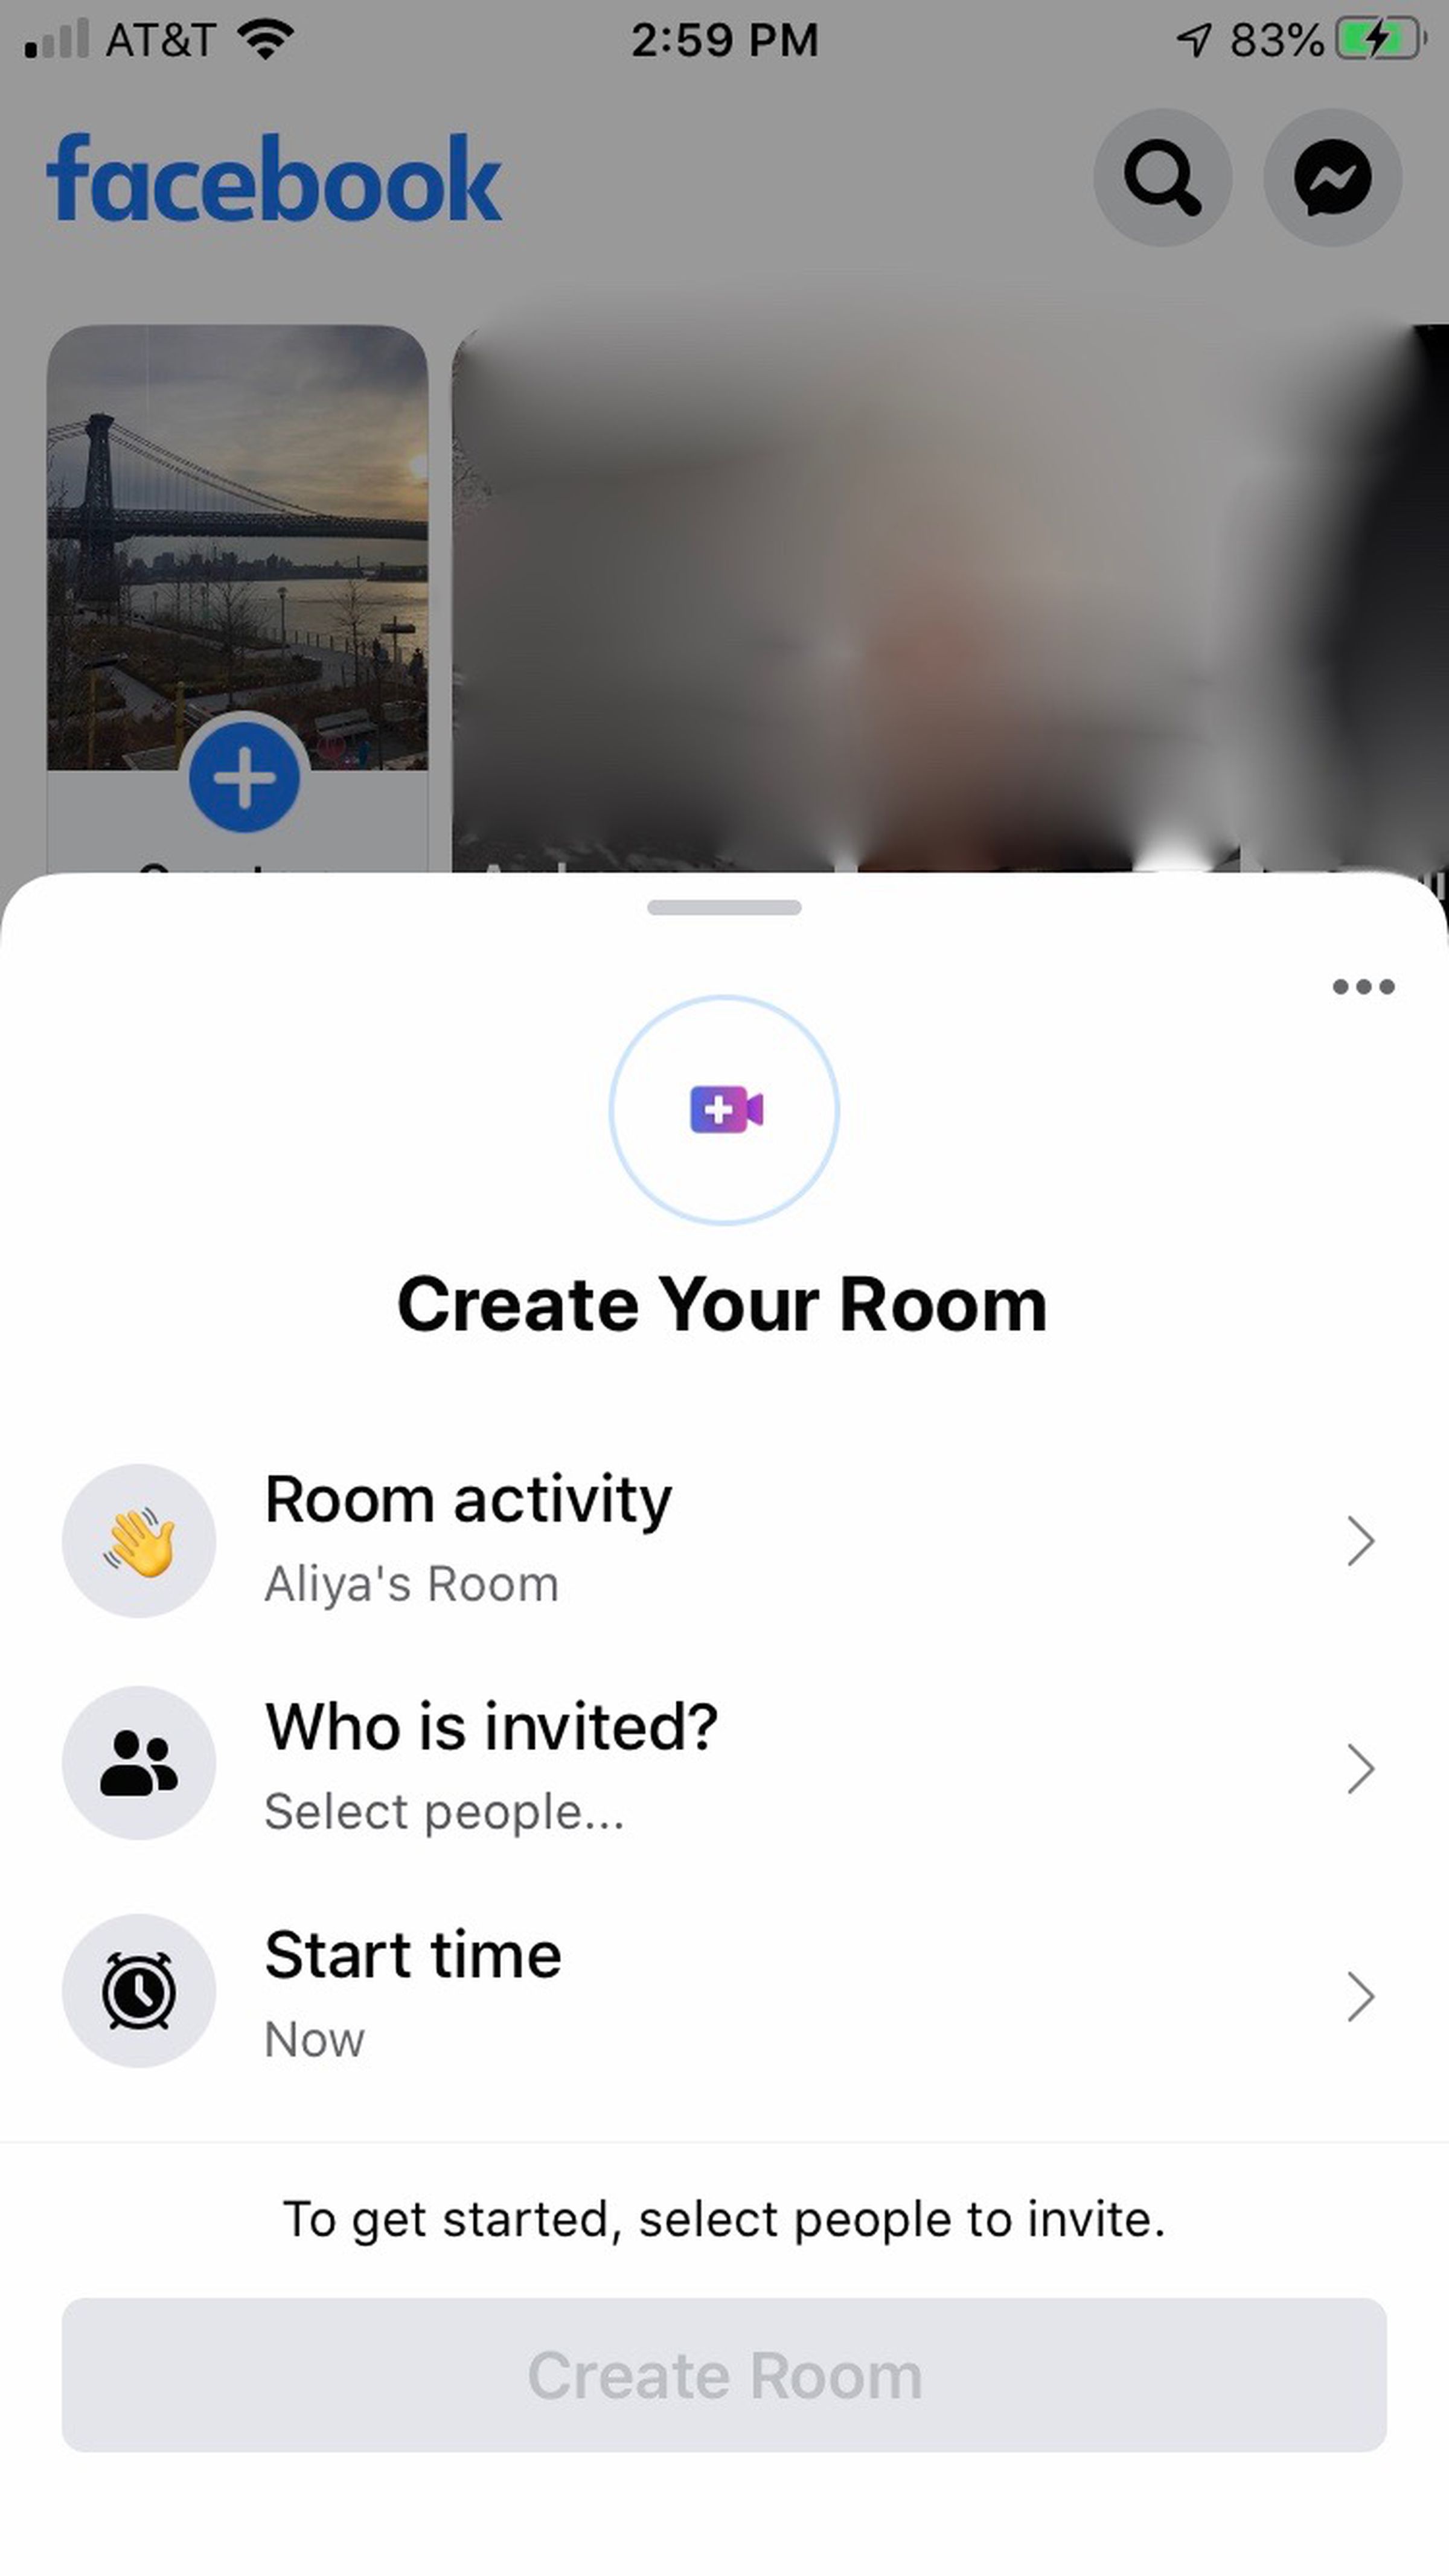 A menu will appear at the bottom of your screen, with three options: “Room activity,” “Who is invited?” and “Start time.”